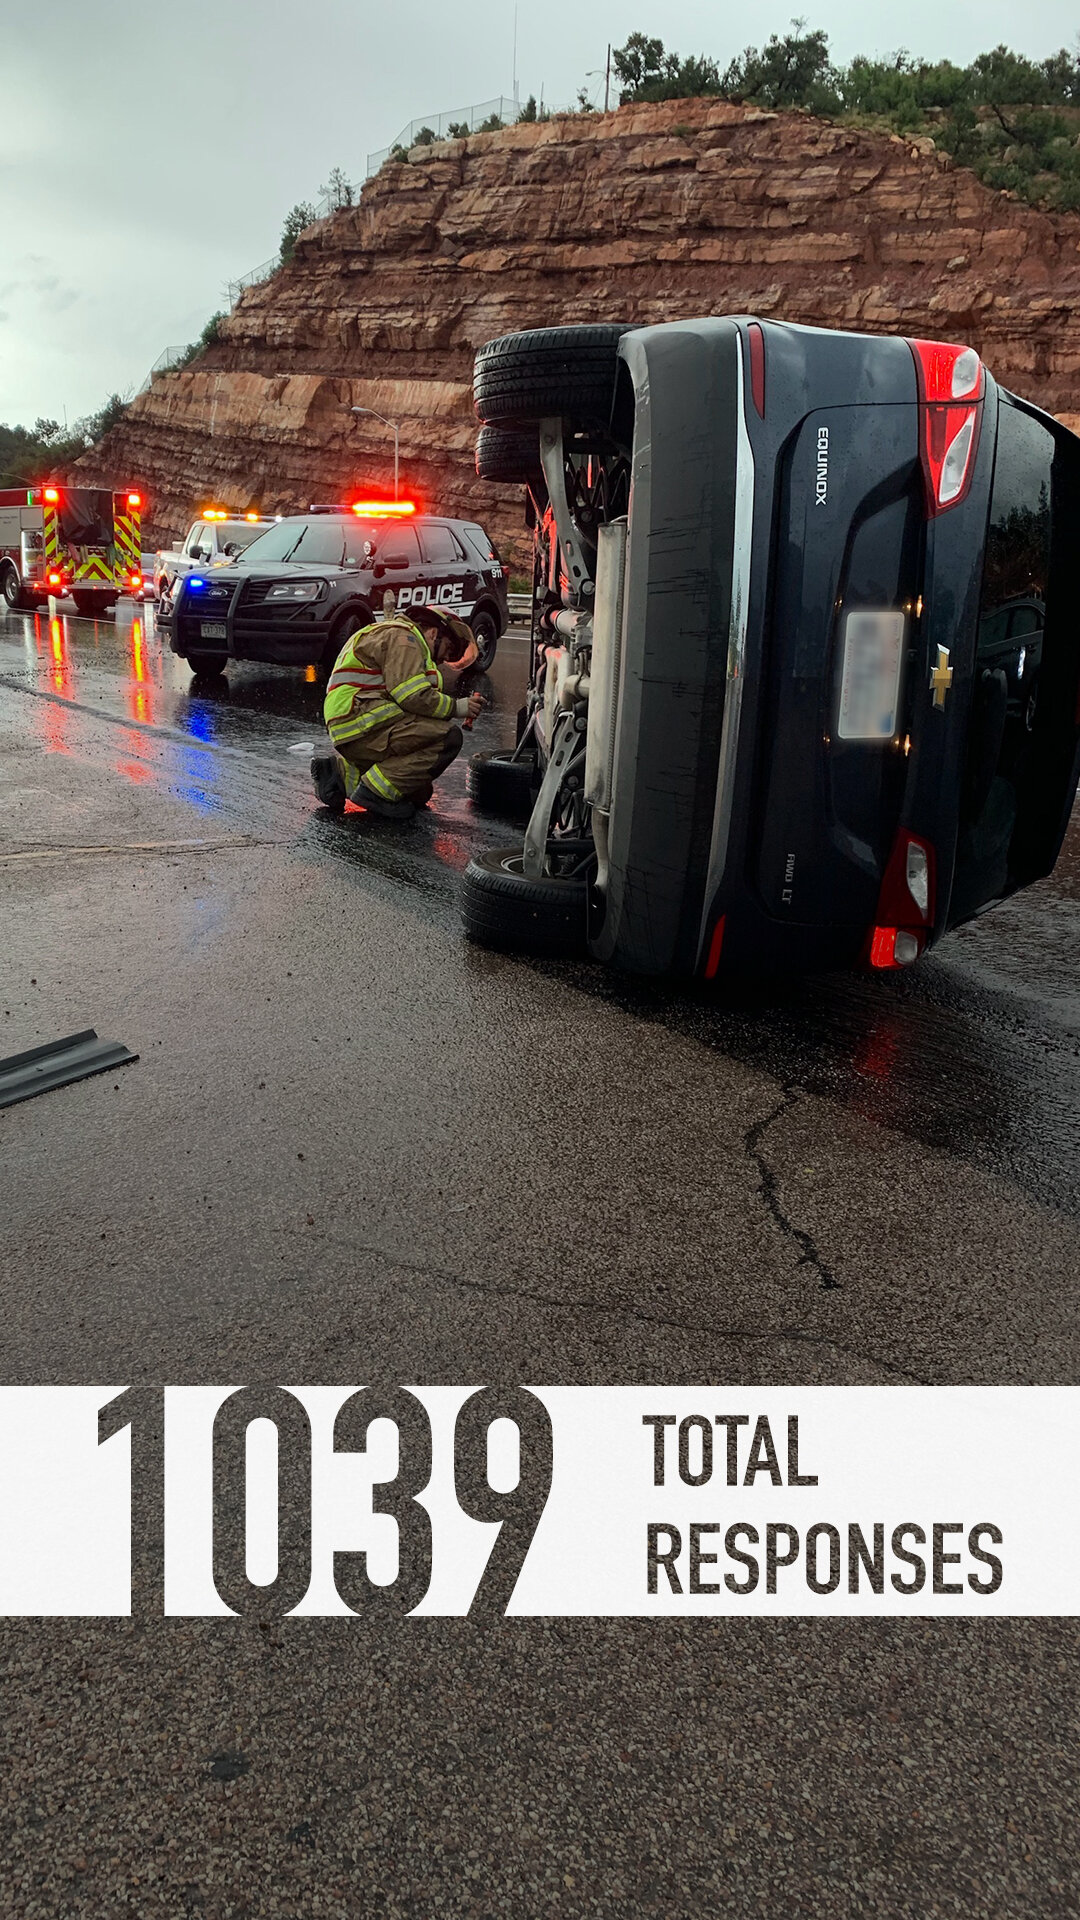 2019 Annual Report - 4 Incidents.jpg